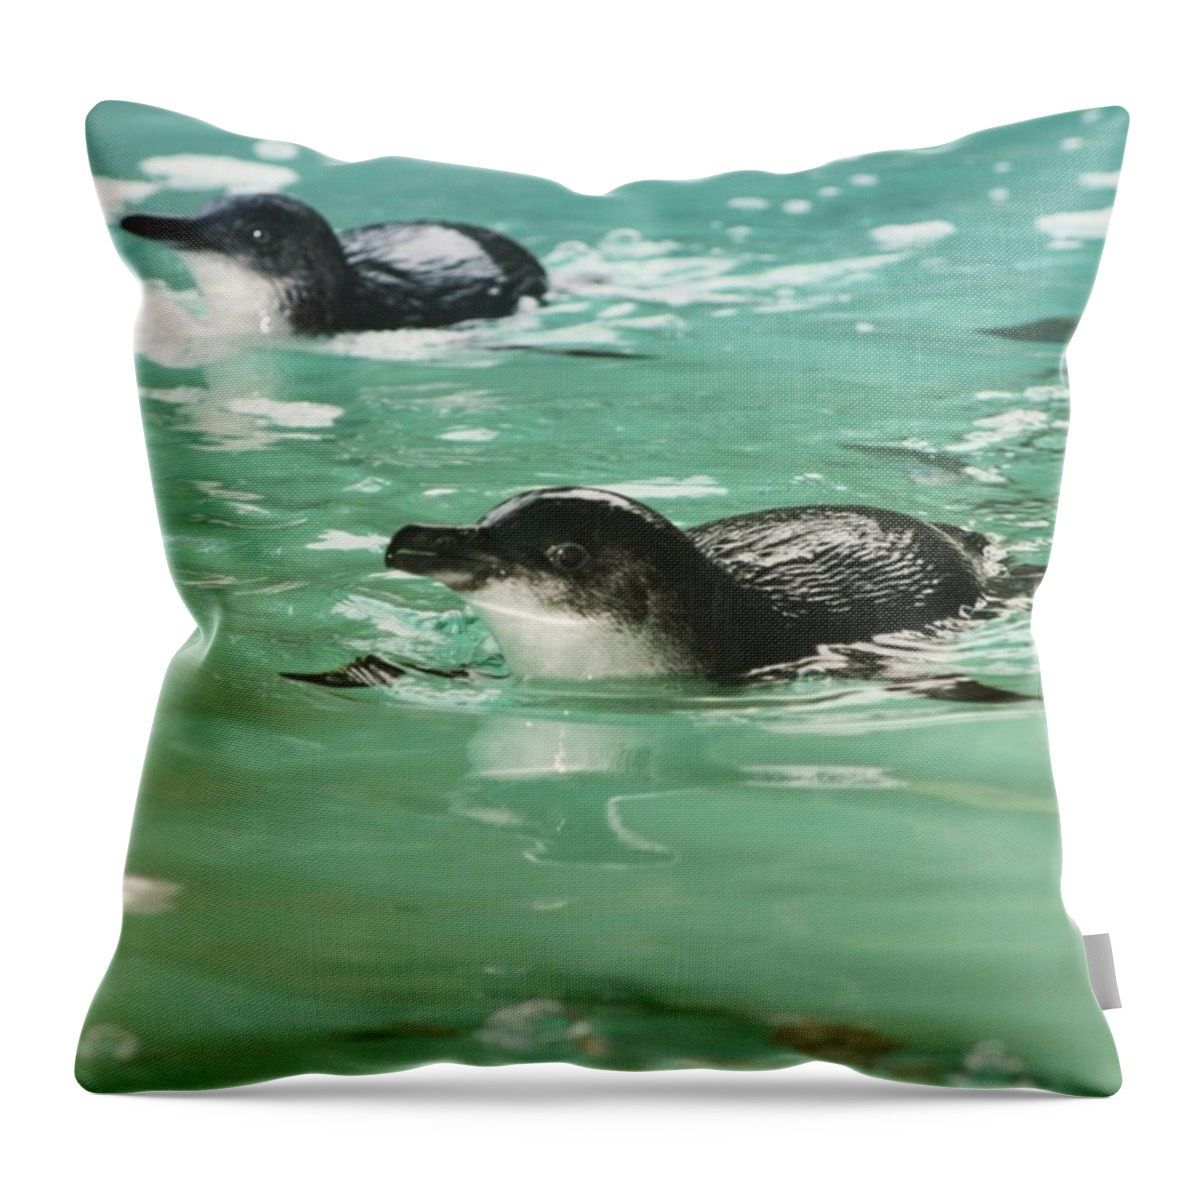 Cute Throw Pillow featuring the photograph Little Penguin by Cat Penaluna